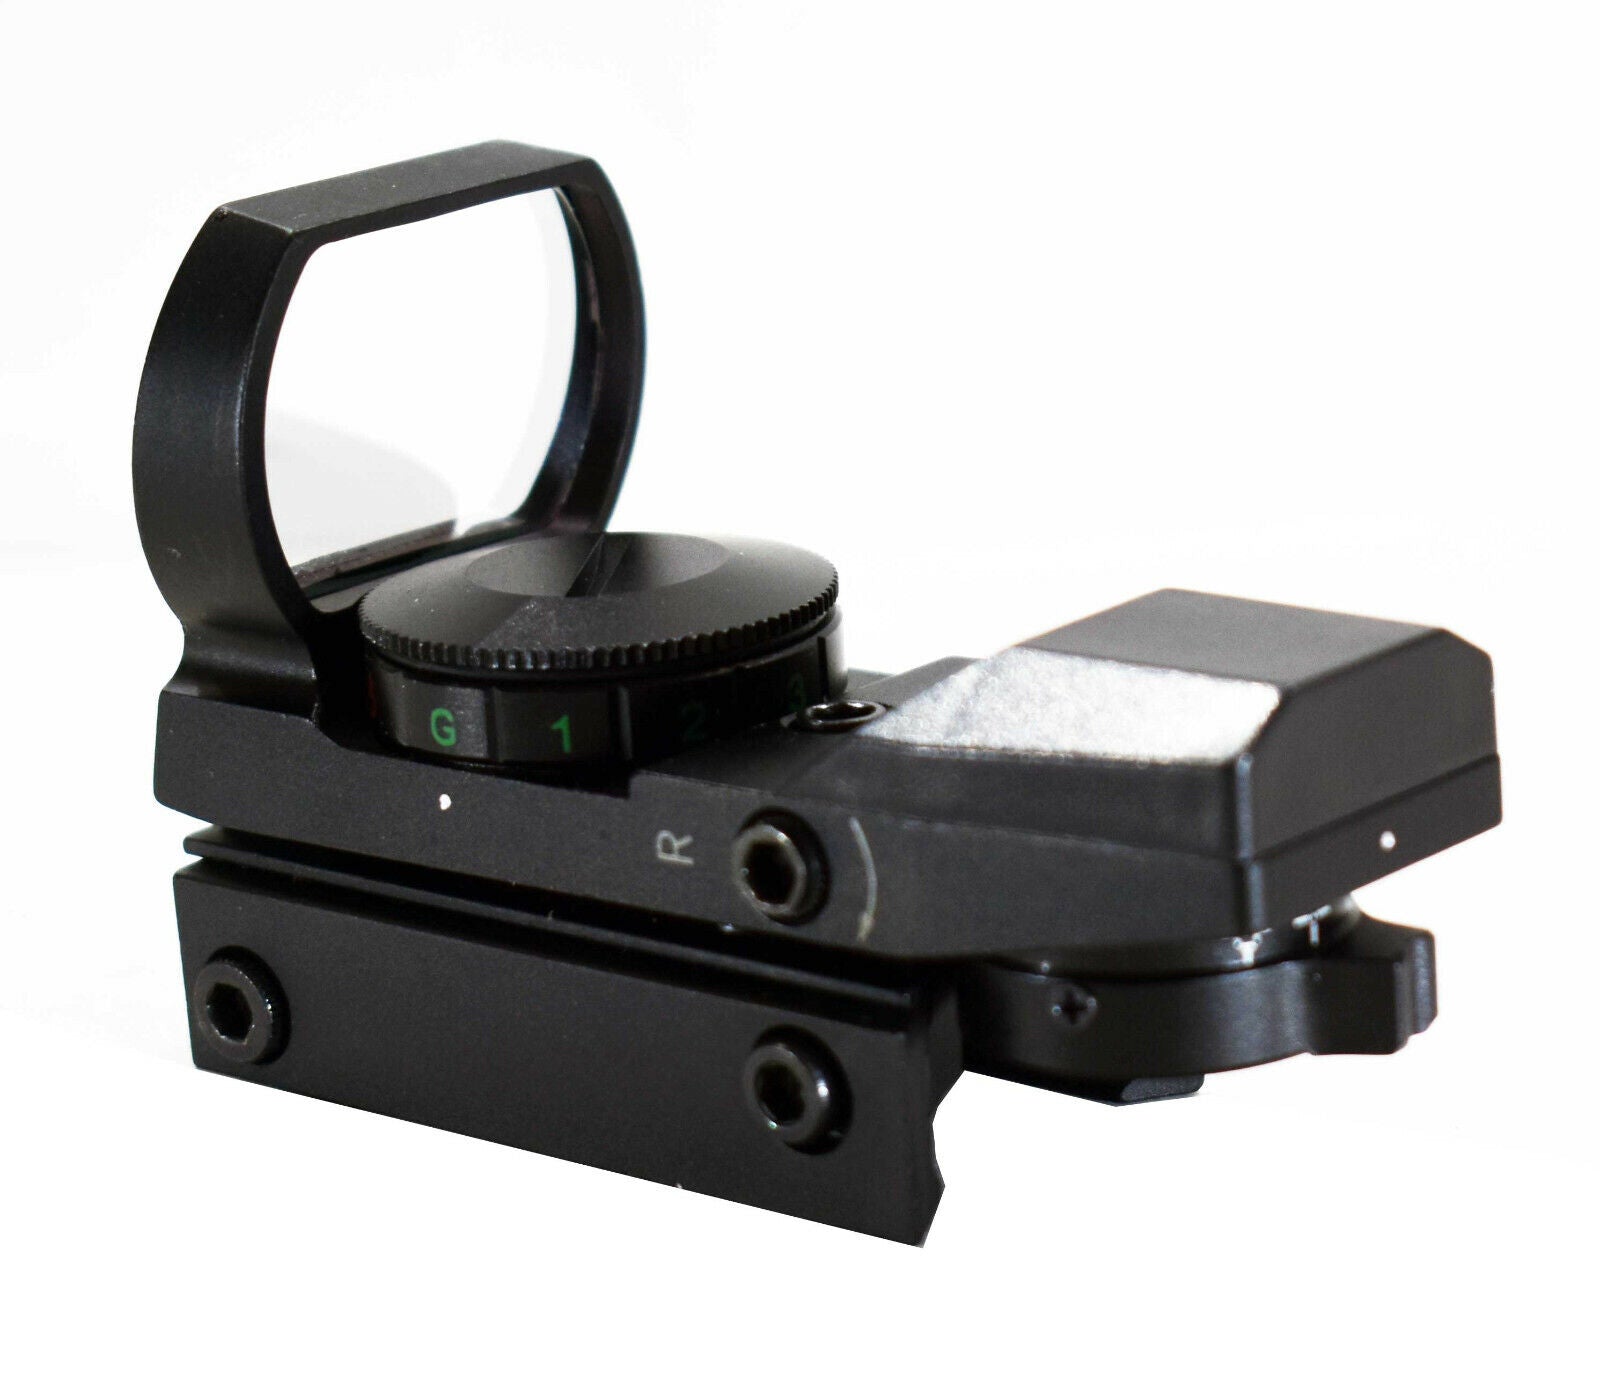 Trinity Reflex Sight Red Green Reticles With Saddle Mount Picatinny Rail Adapter Compatible With Remington 870 12 Gauge Pump. - TRINITY SUPPLY INC